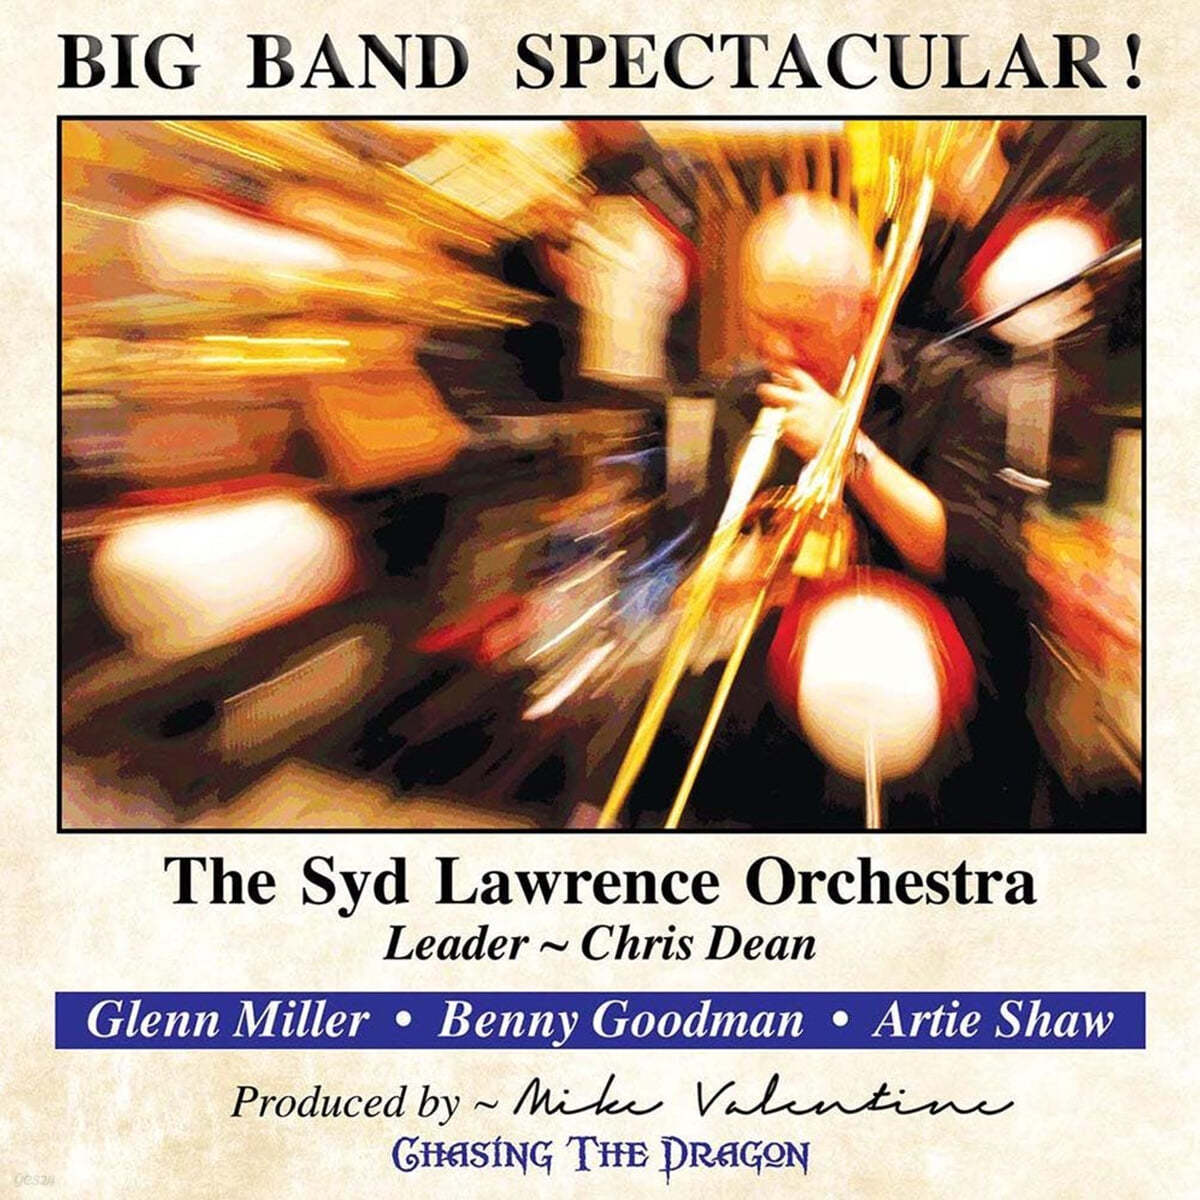 The Syd Lawrence Orchestra 빅 밴드 음악 모음집 (Big Band Spectacular!)  